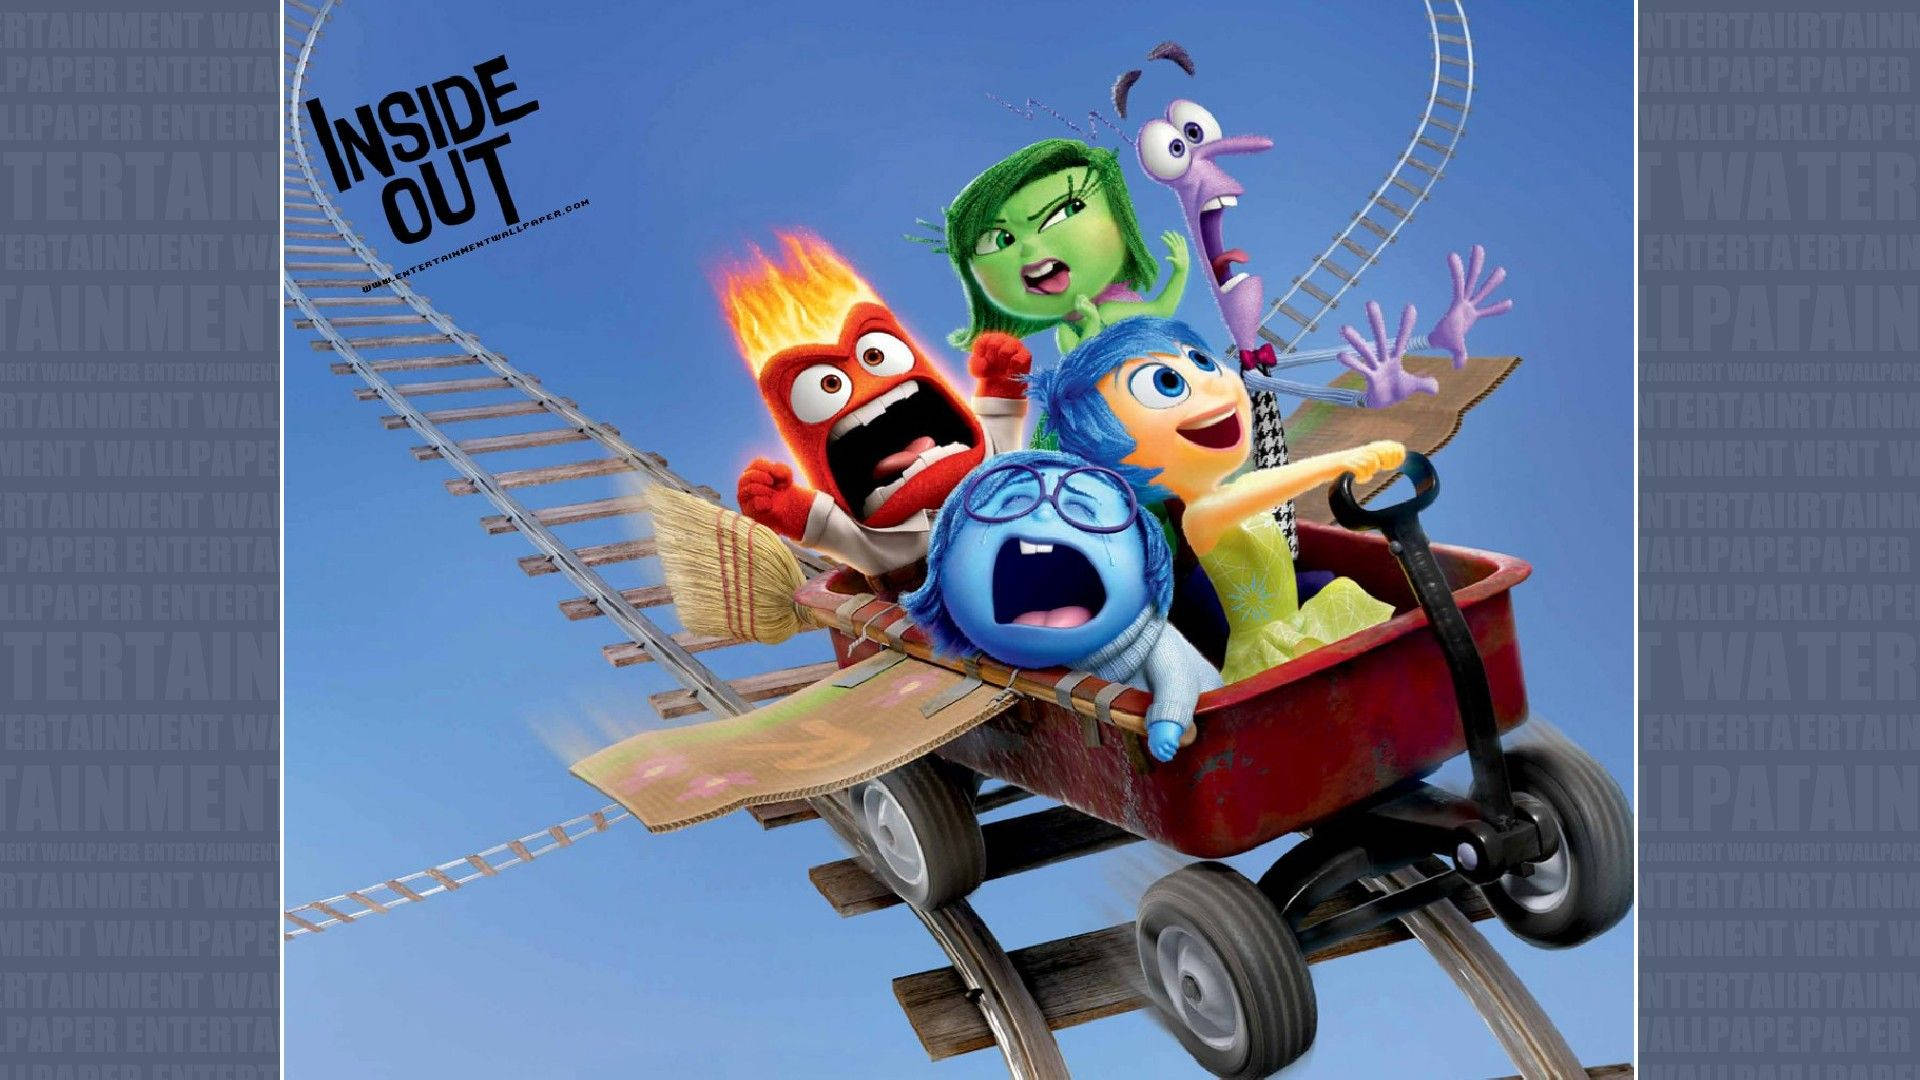 Feel The Adrenaline On This Roller Coaster Ride Inspired By The Movie, Inside Out! Background